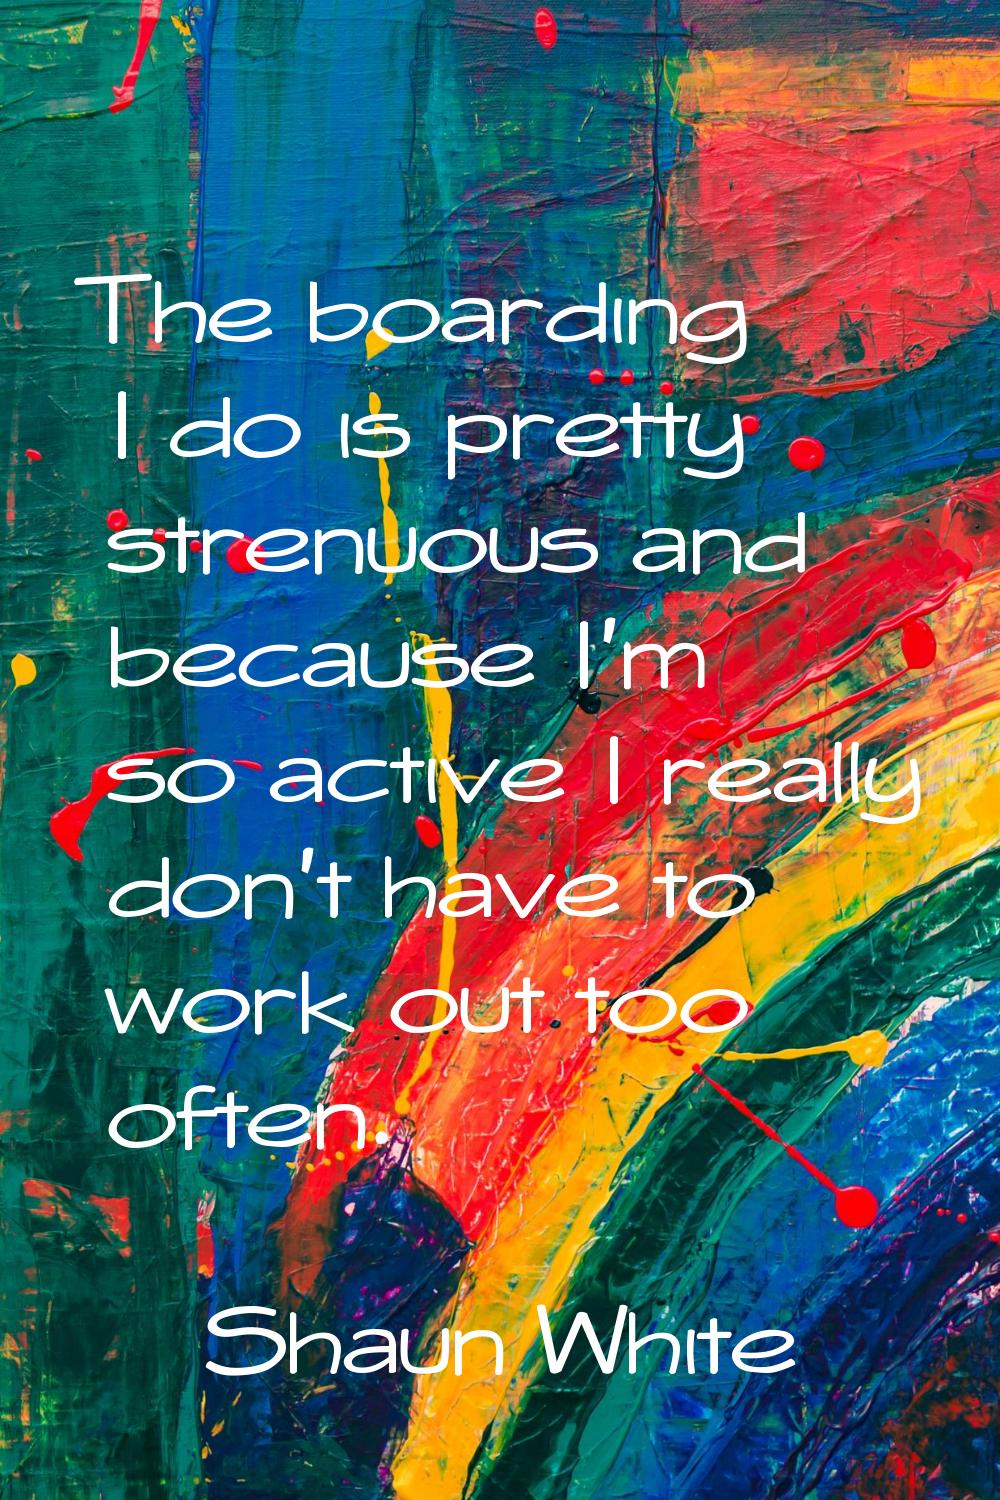 The boarding I do is pretty strenuous and because I'm so active I really don't have to work out too